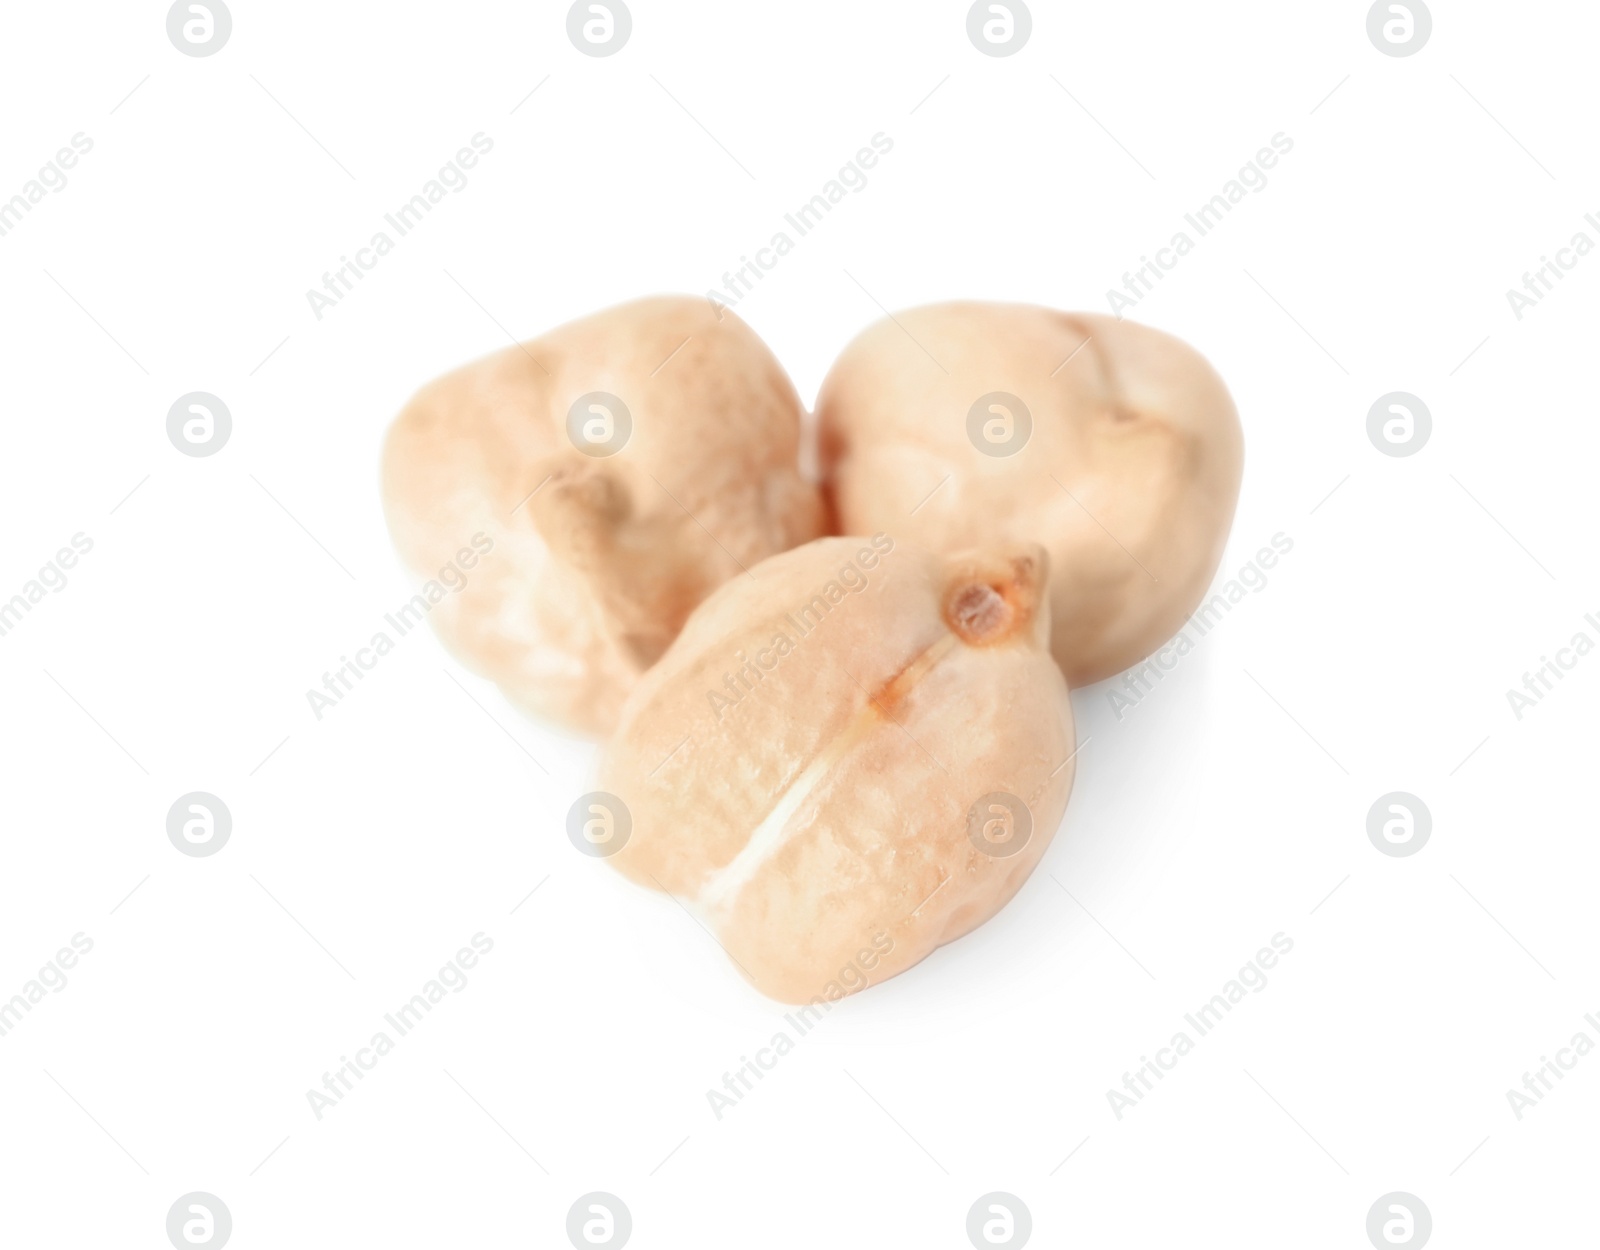 Photo of Pile of raw chickpeas on white background. Vegetable planting